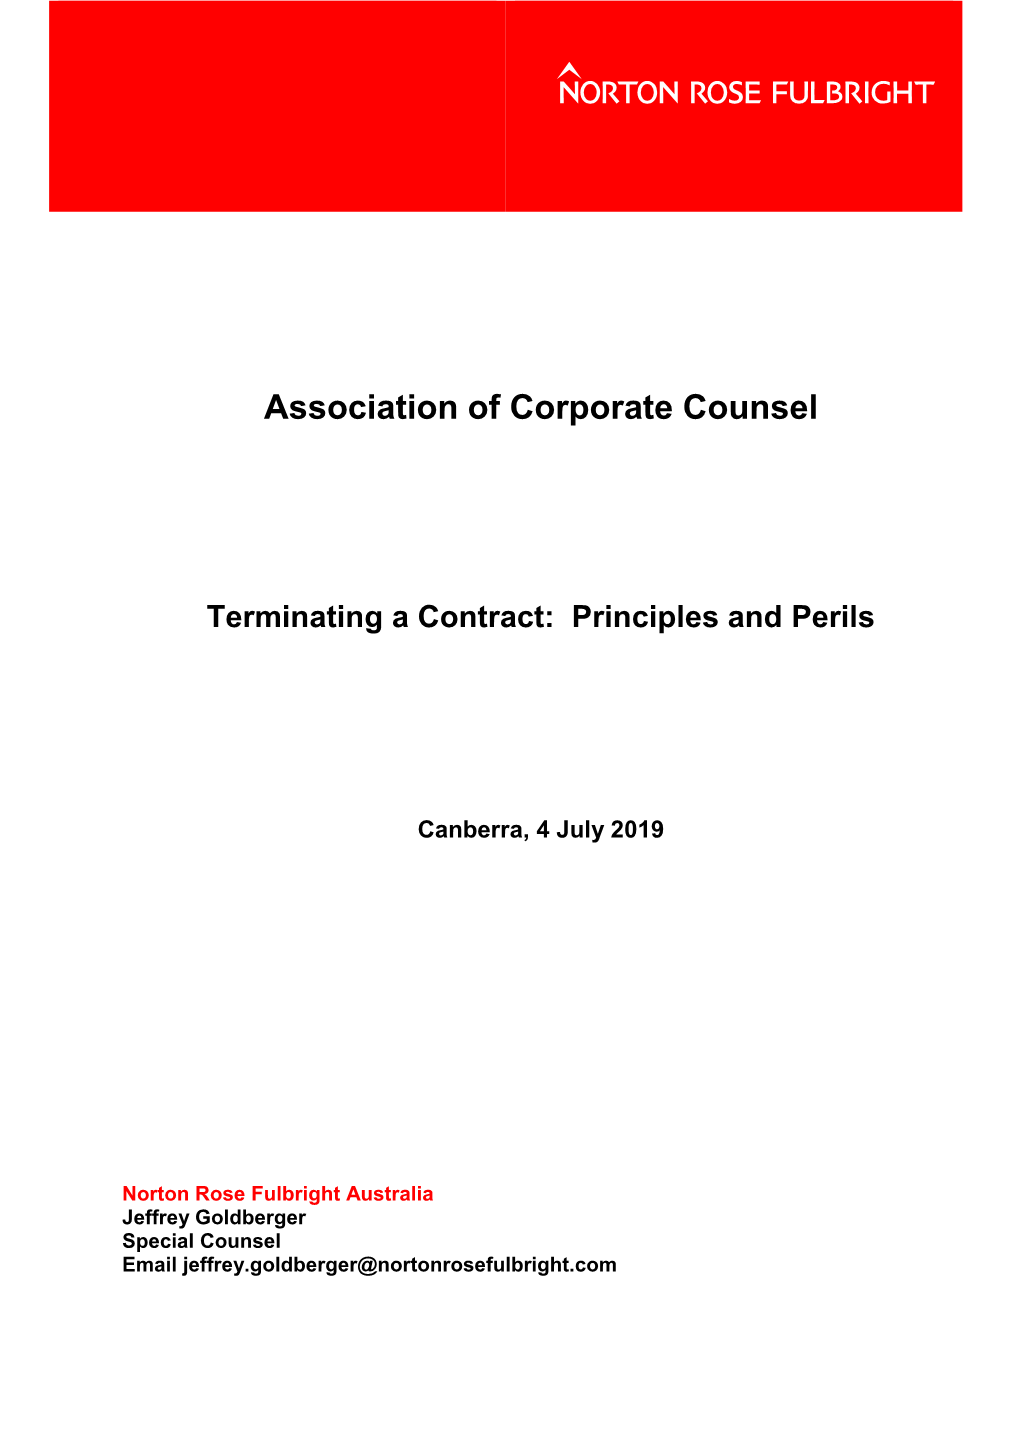 Terminating a Contract: Principles and Perils